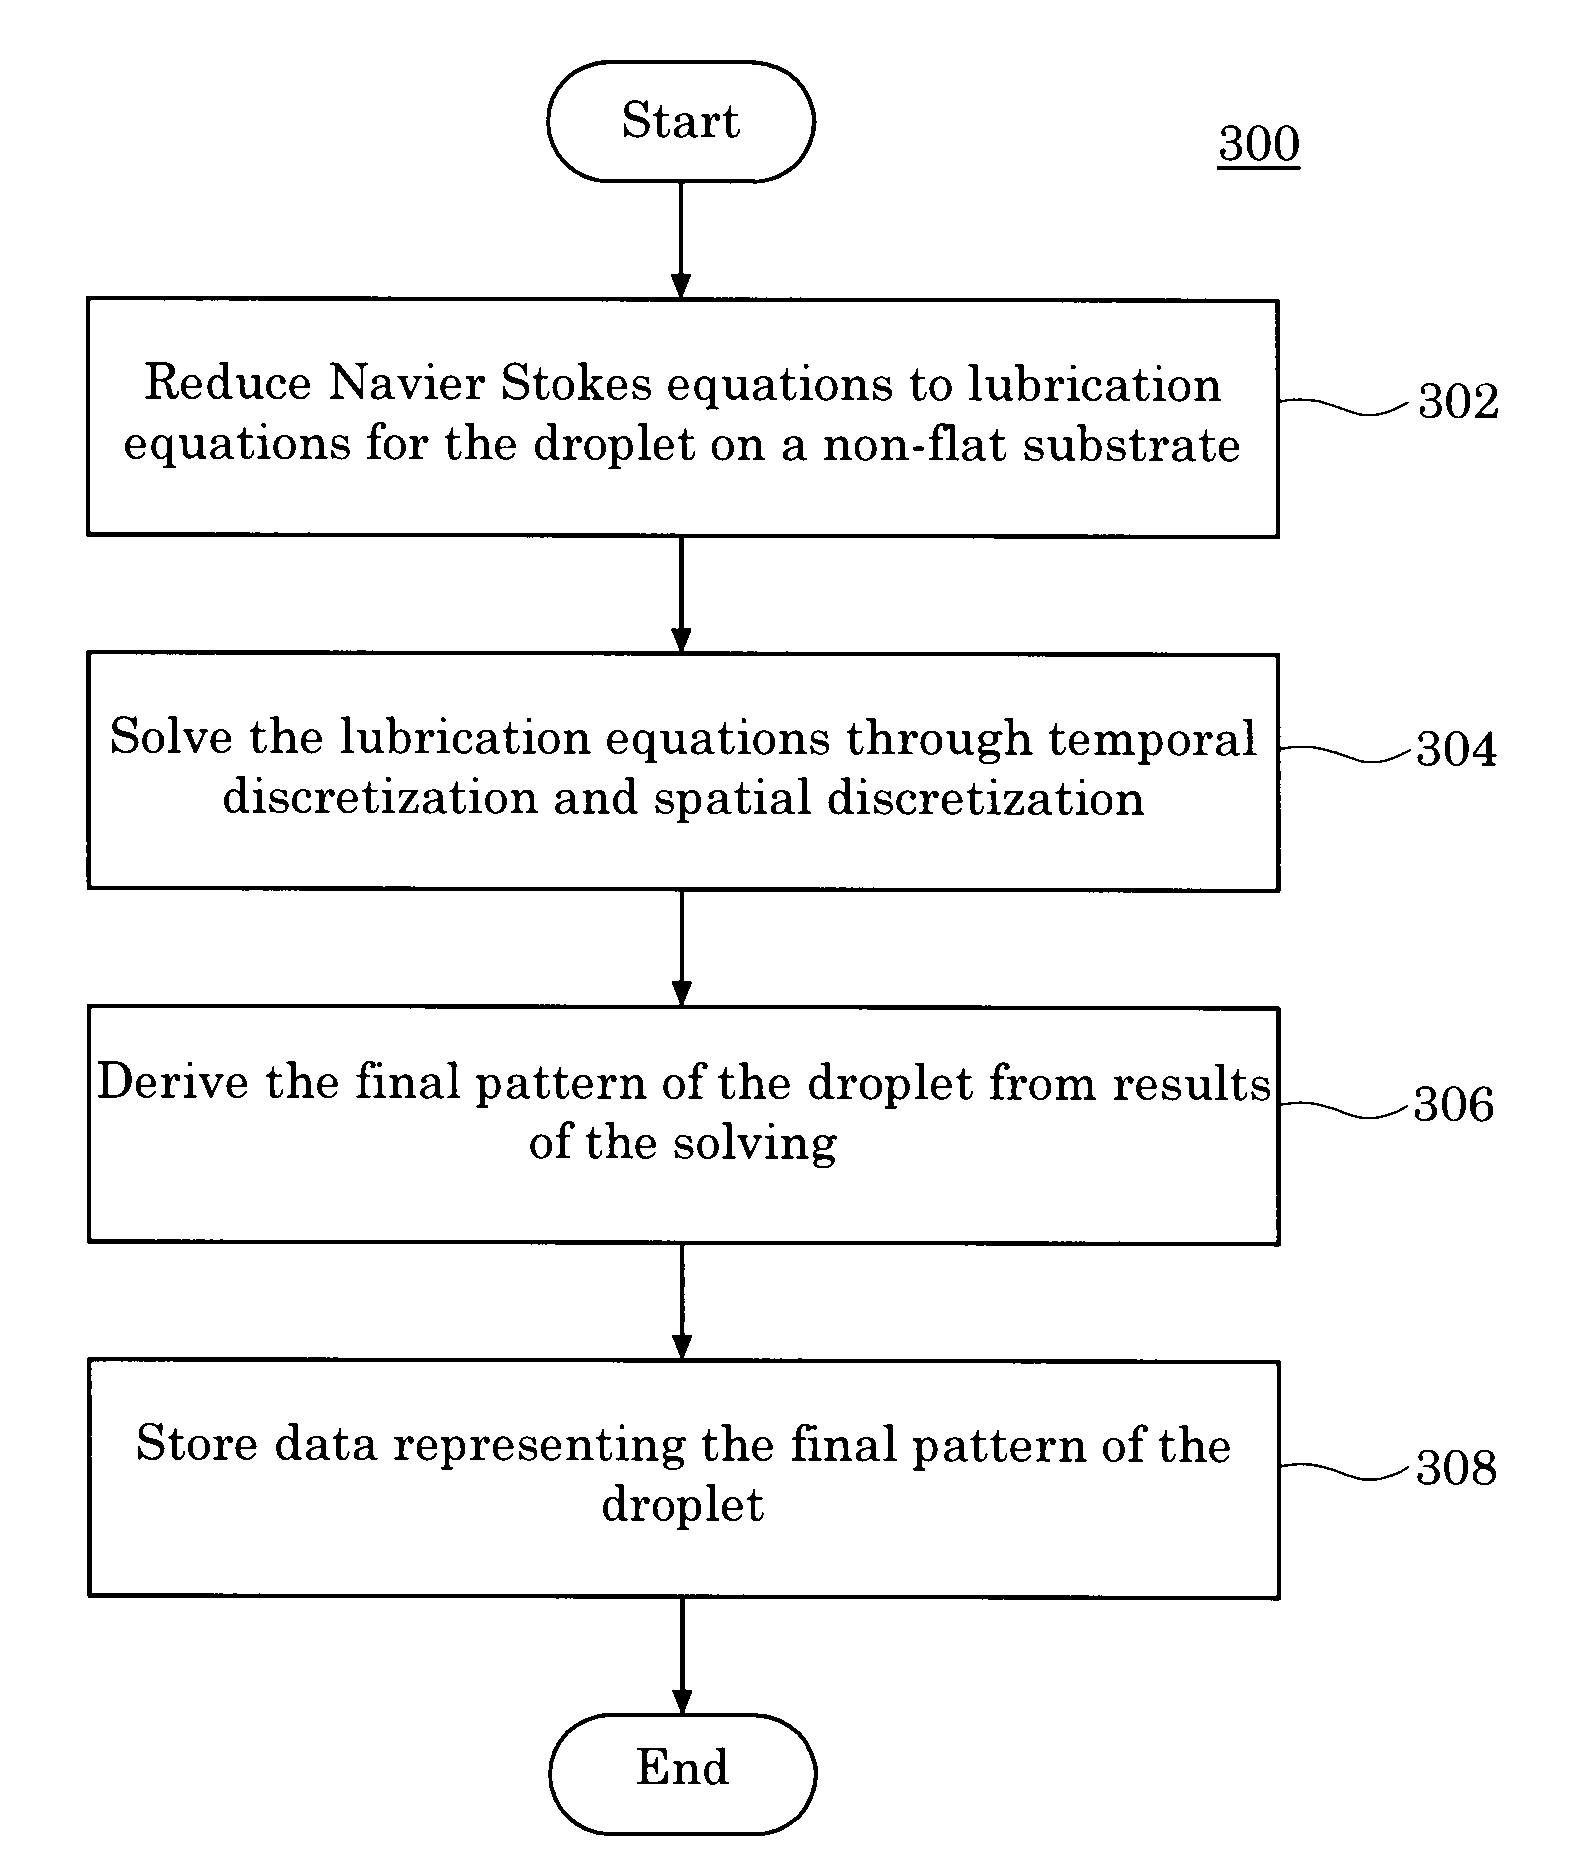 Finite Difference Algorithm for Solving Lubrication Equations with Solute Diffusion